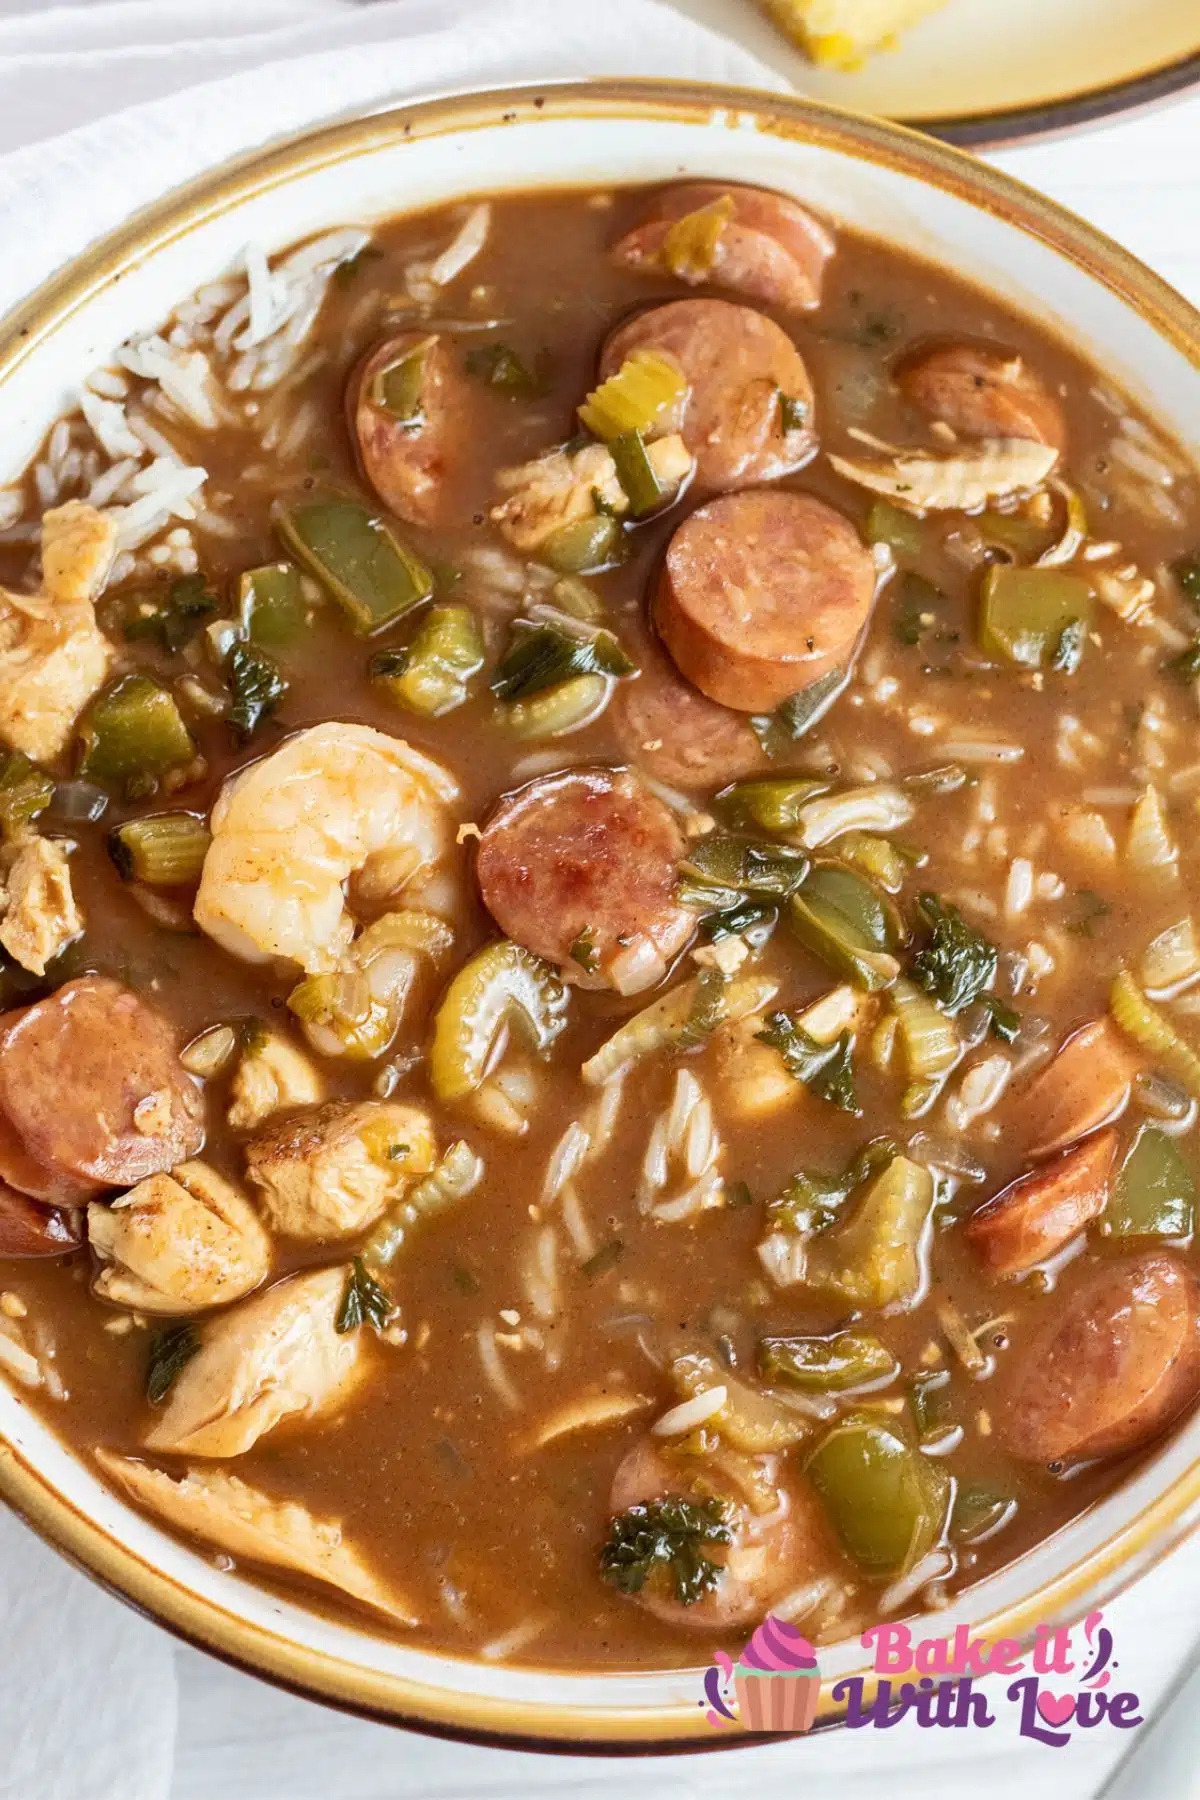 Tall overhead of the dished up gumbo soup with steamed white rice mixed in.